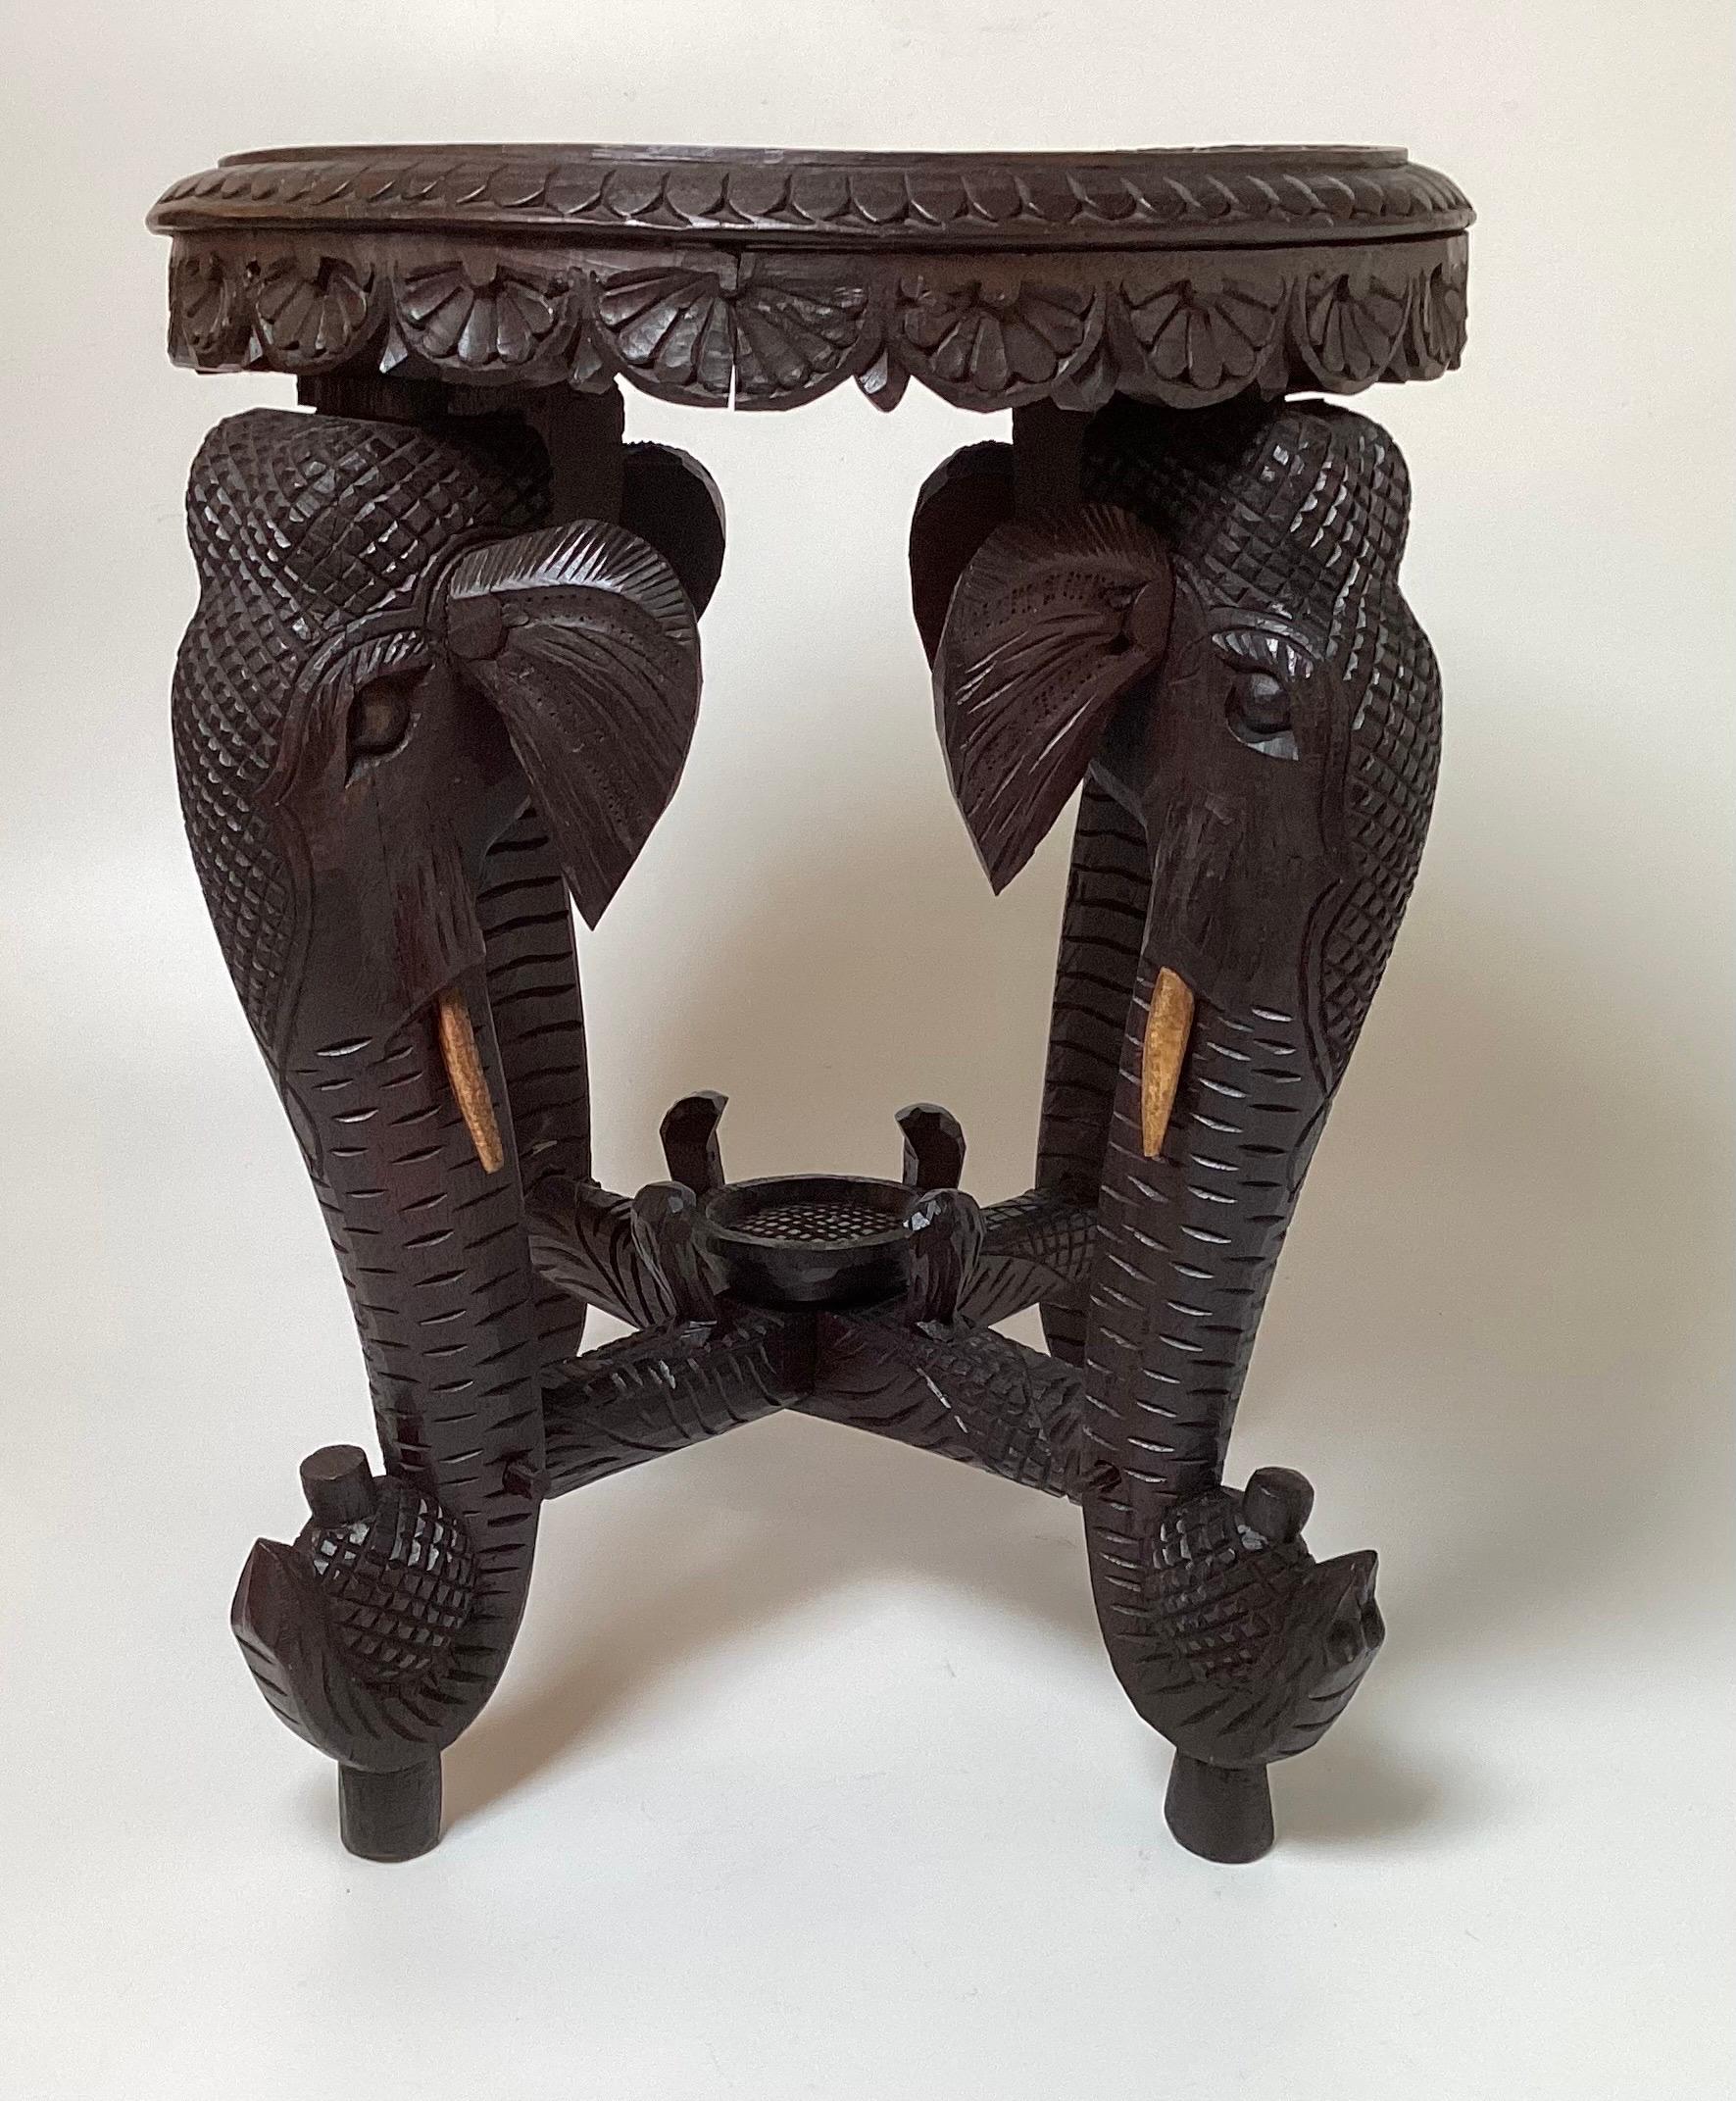 Hand-Carved 19th Century Burmese Carved Hardwood Elephant Form Table, Stand For Sale